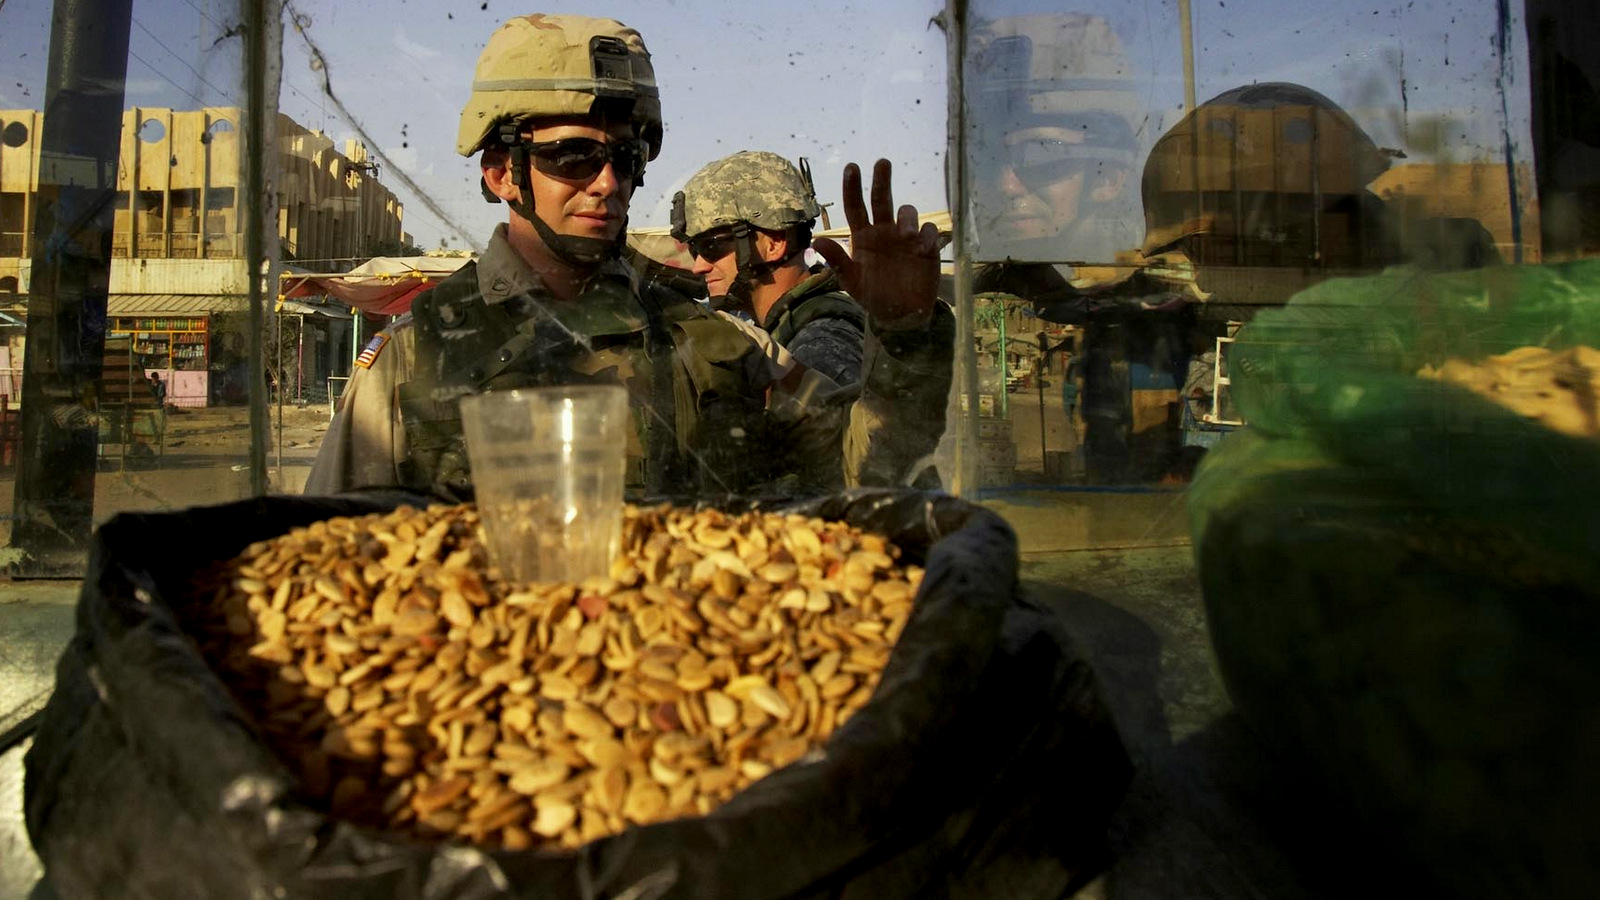 A U.S. Army soldier walks passed a seed vendor in Sadr City in Baghdad, Iraq, July 28, 2005. (AP Photo/Jacob Silberberg)